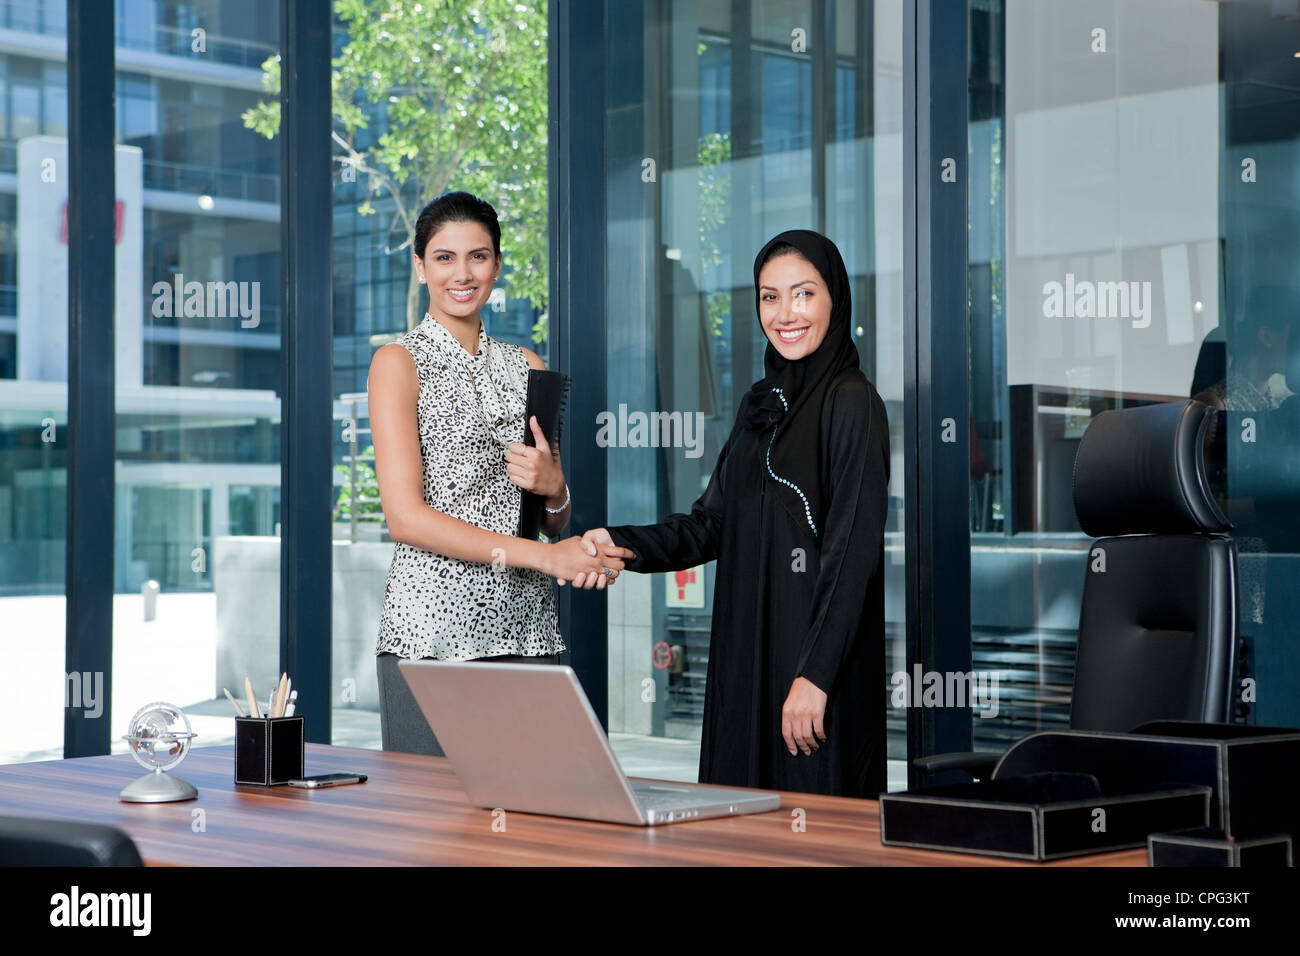 Two businesswomen shaking hands in office. Banque D'Images